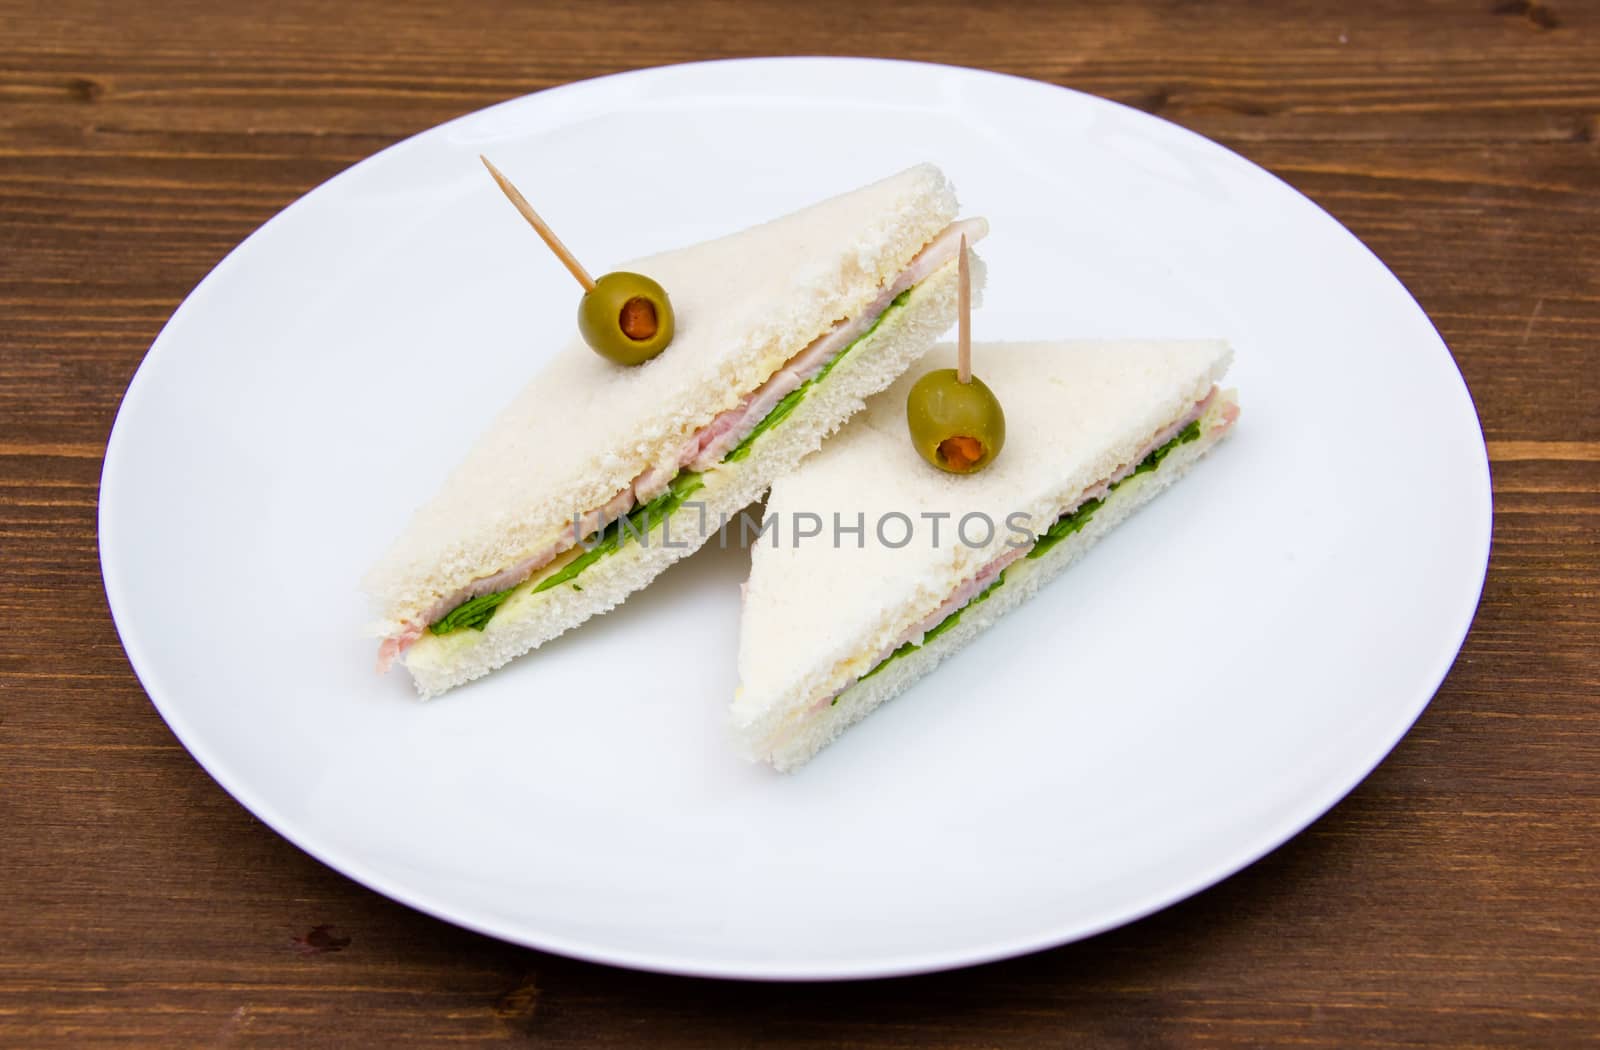 Triangular sandwiches on plate on wooden table